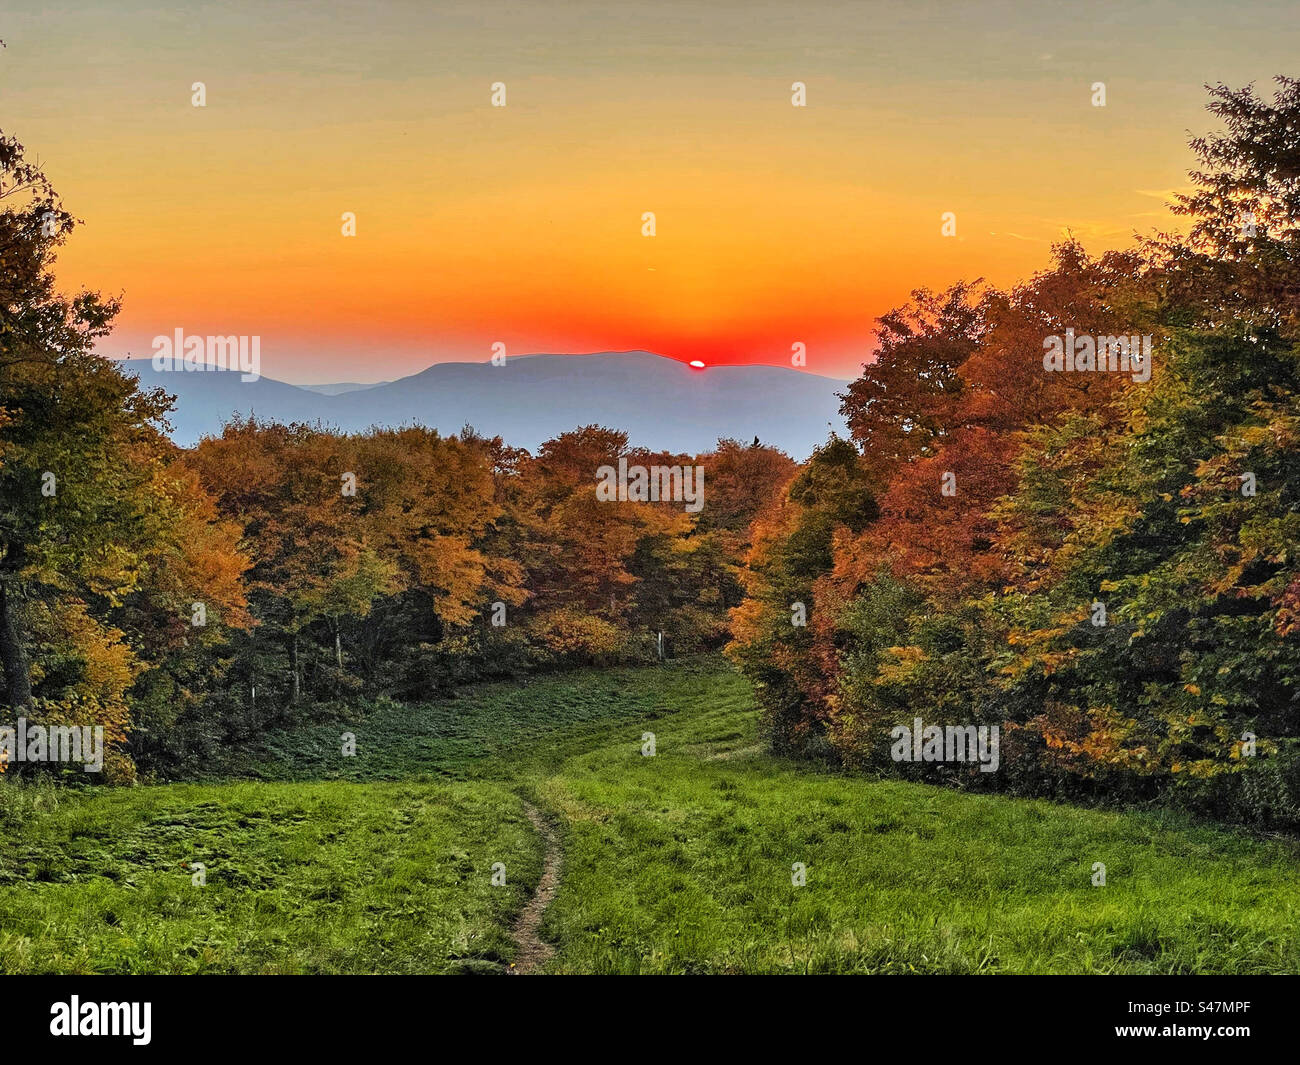 The sunset over a distant mountain with fall foliage in the foreground. Stock Photo